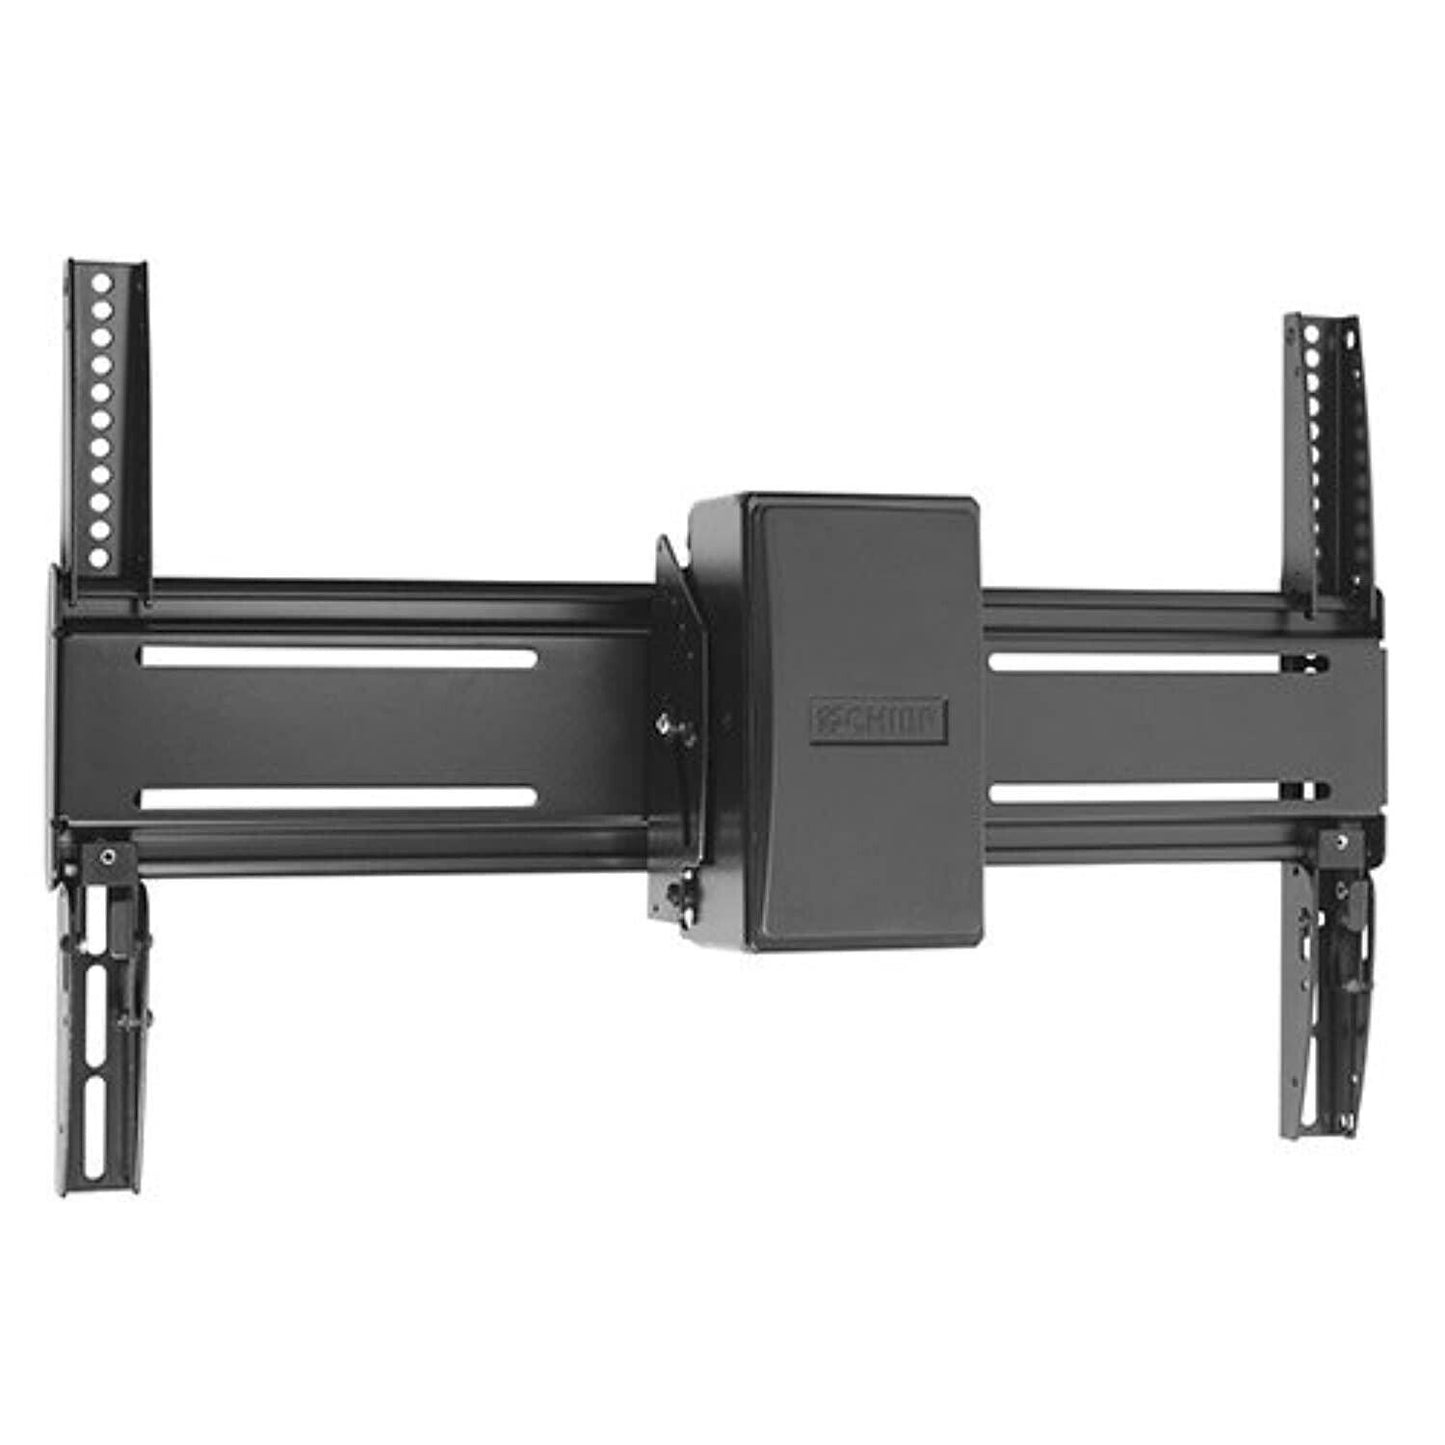 Chief FIT RLC1 Ceiling Mount for Flat Panel Display